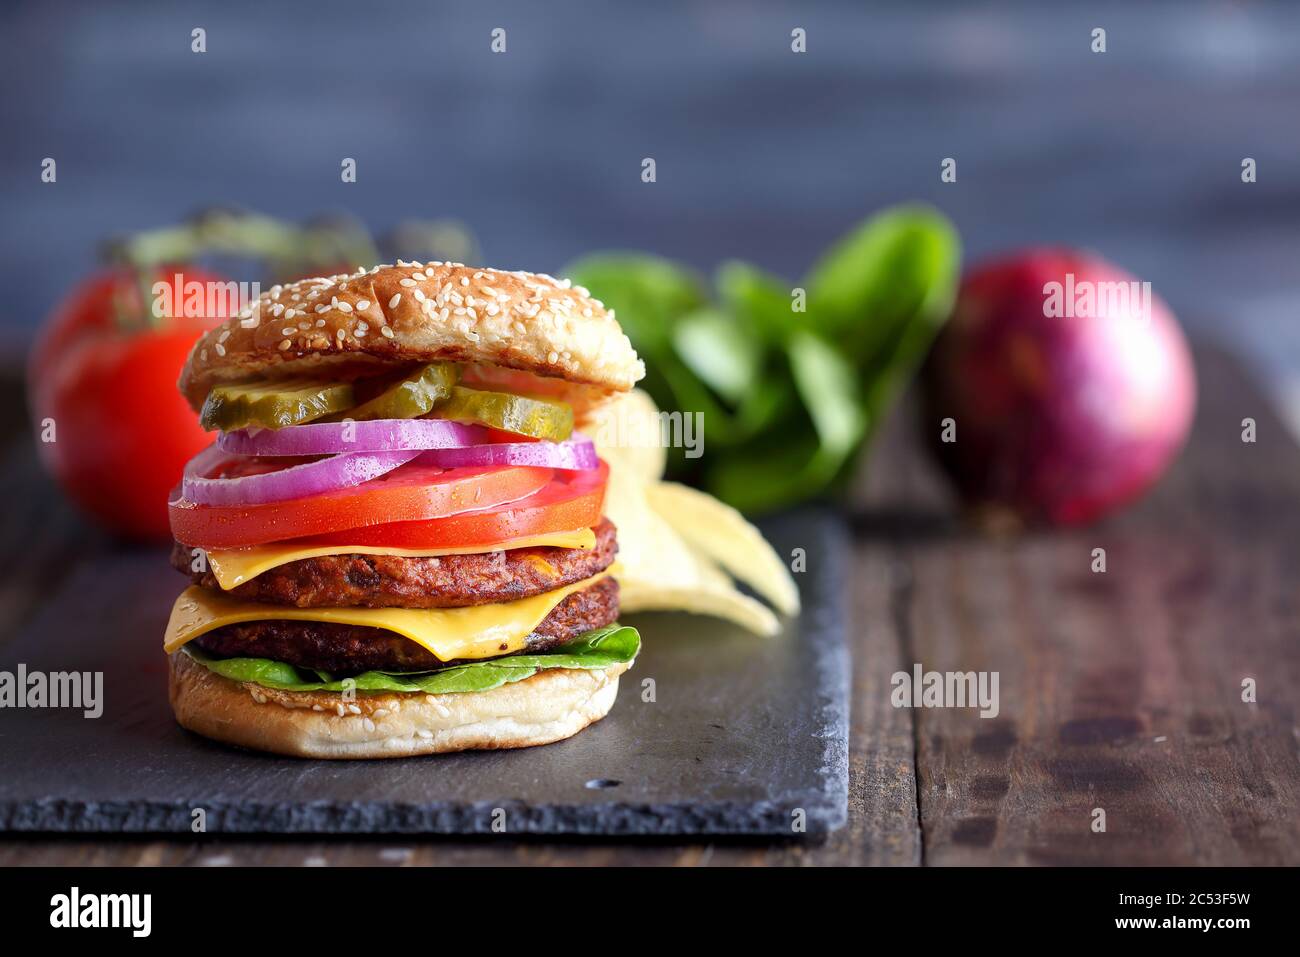 Vegetarian cheeseburger made with two meat substitute patties, slices of melted cheese, onions, pickles, lettuce, and tomato on a fresh sesame seed bu Stock Photo